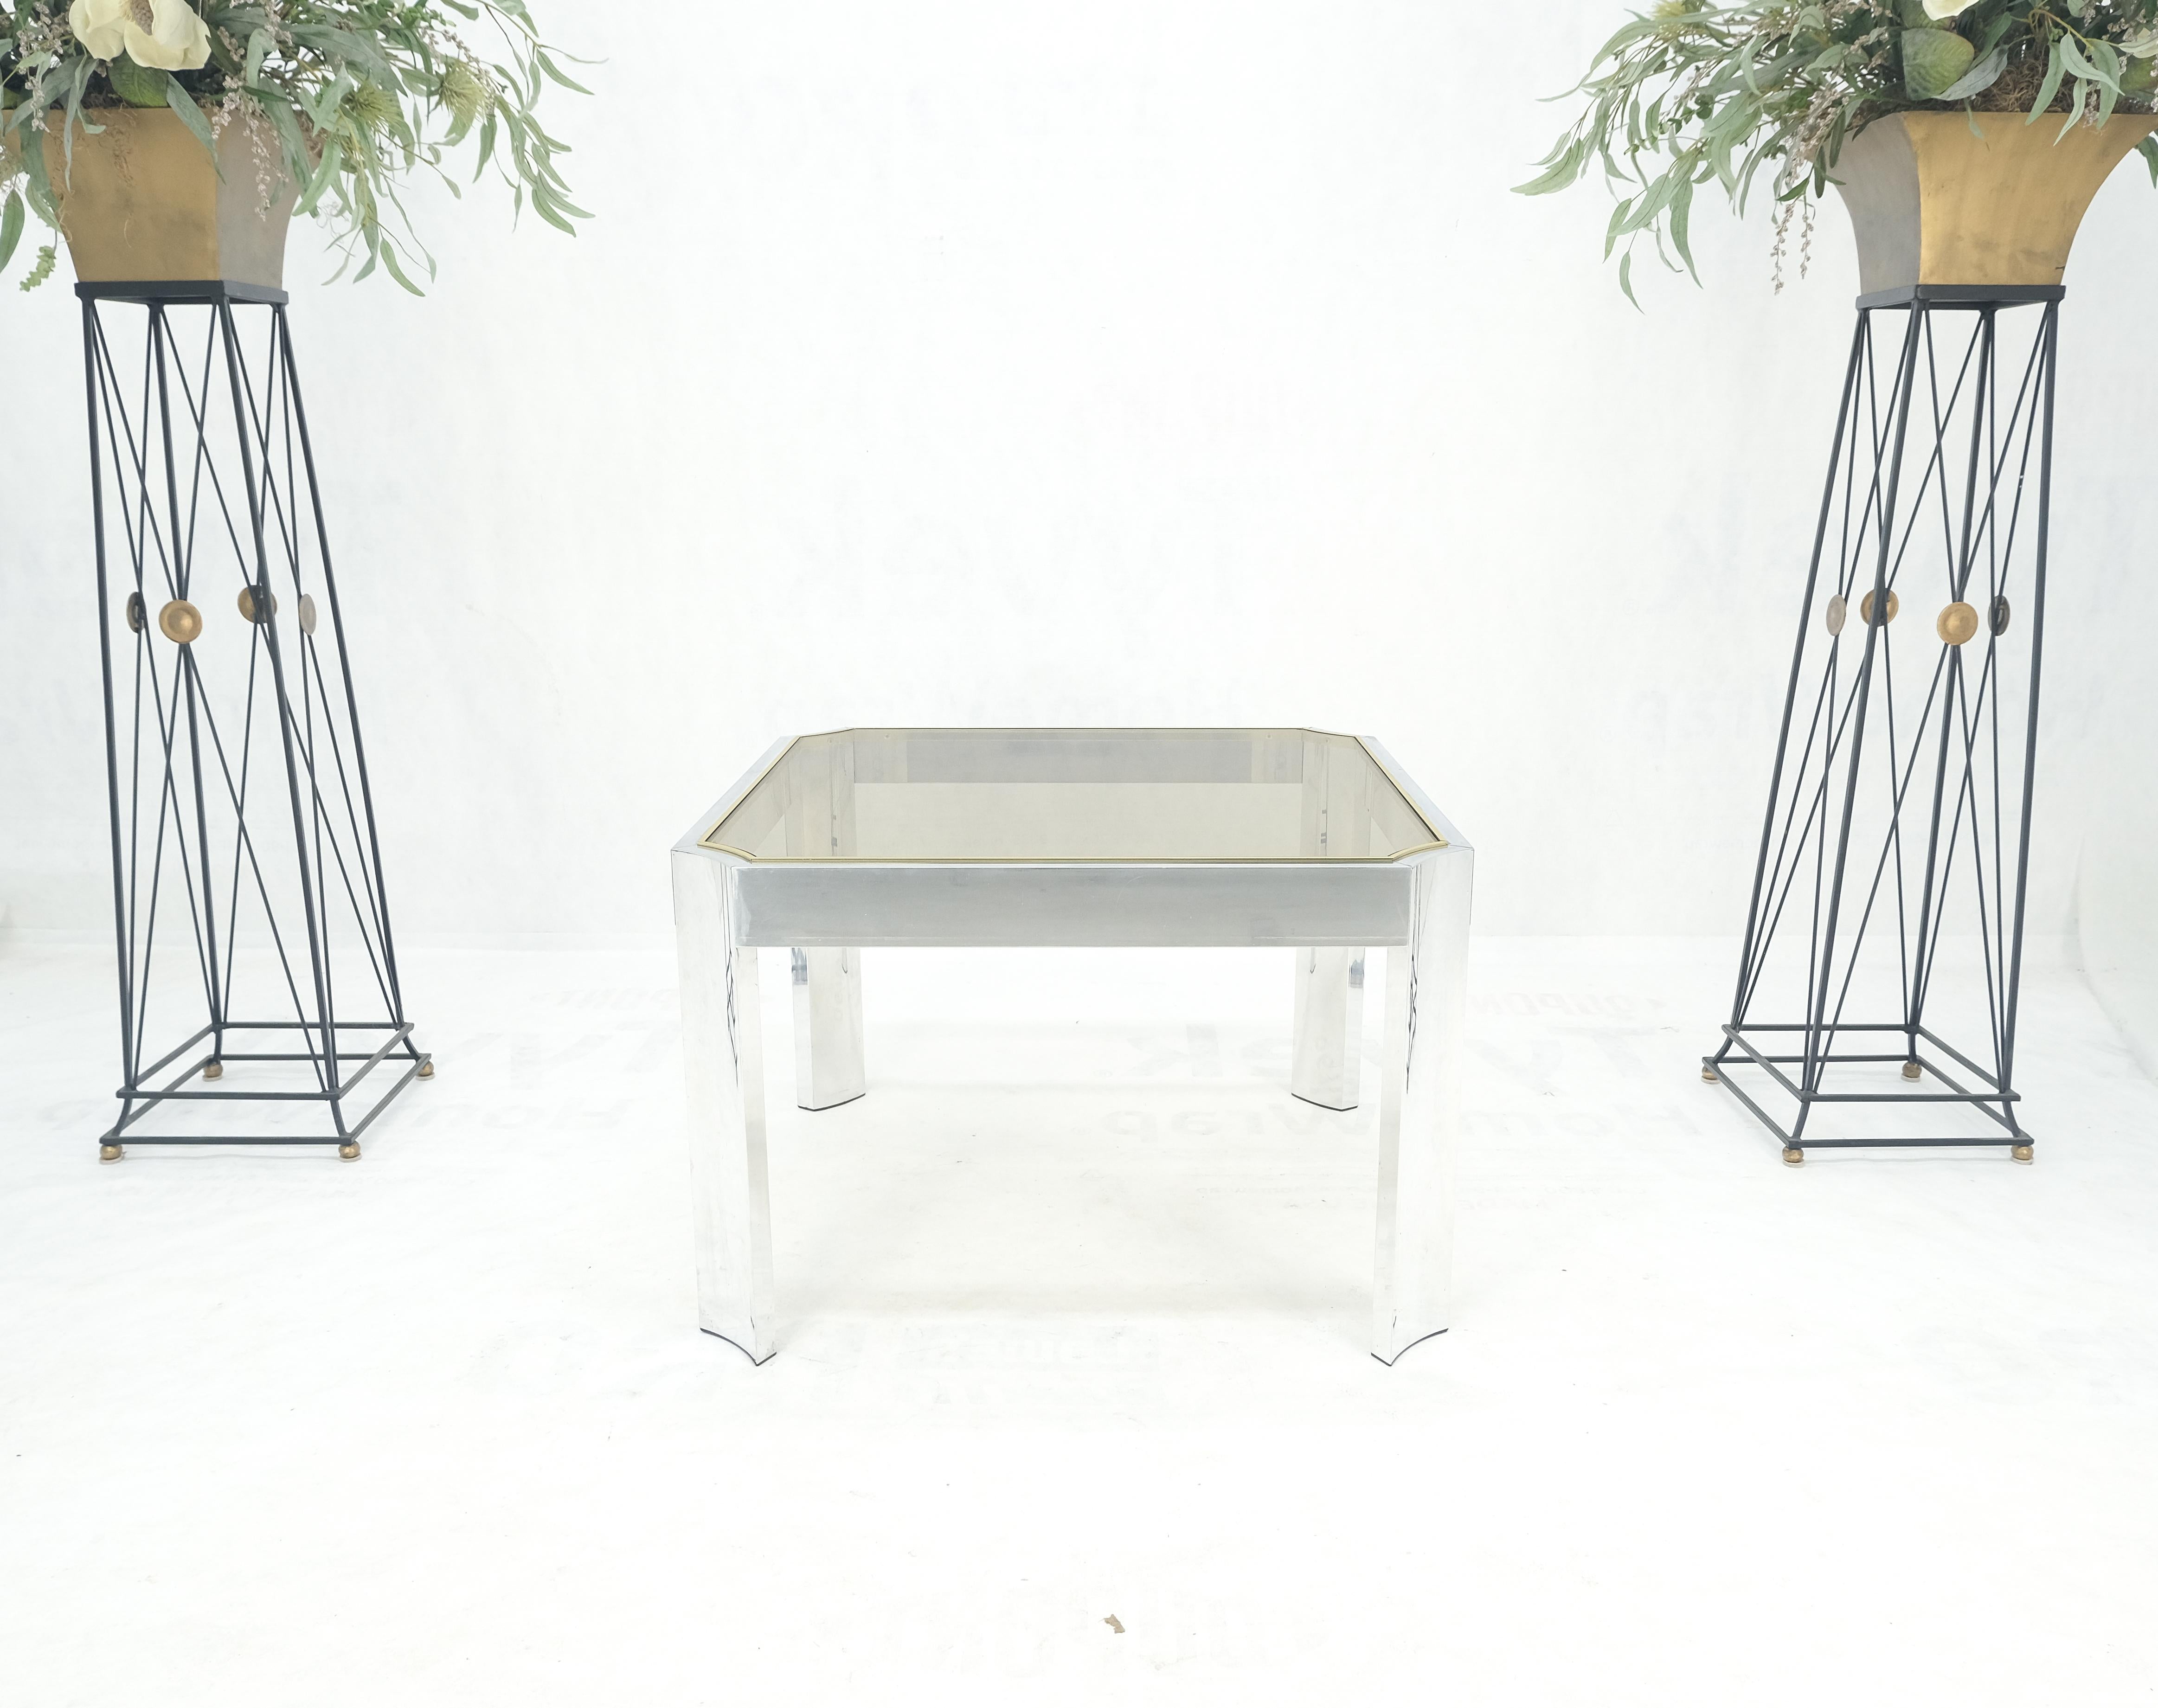 20th Century Polished Aluminum Profile Brass Basel Smoked Glass Top Square Coffee Table MINT! For Sale